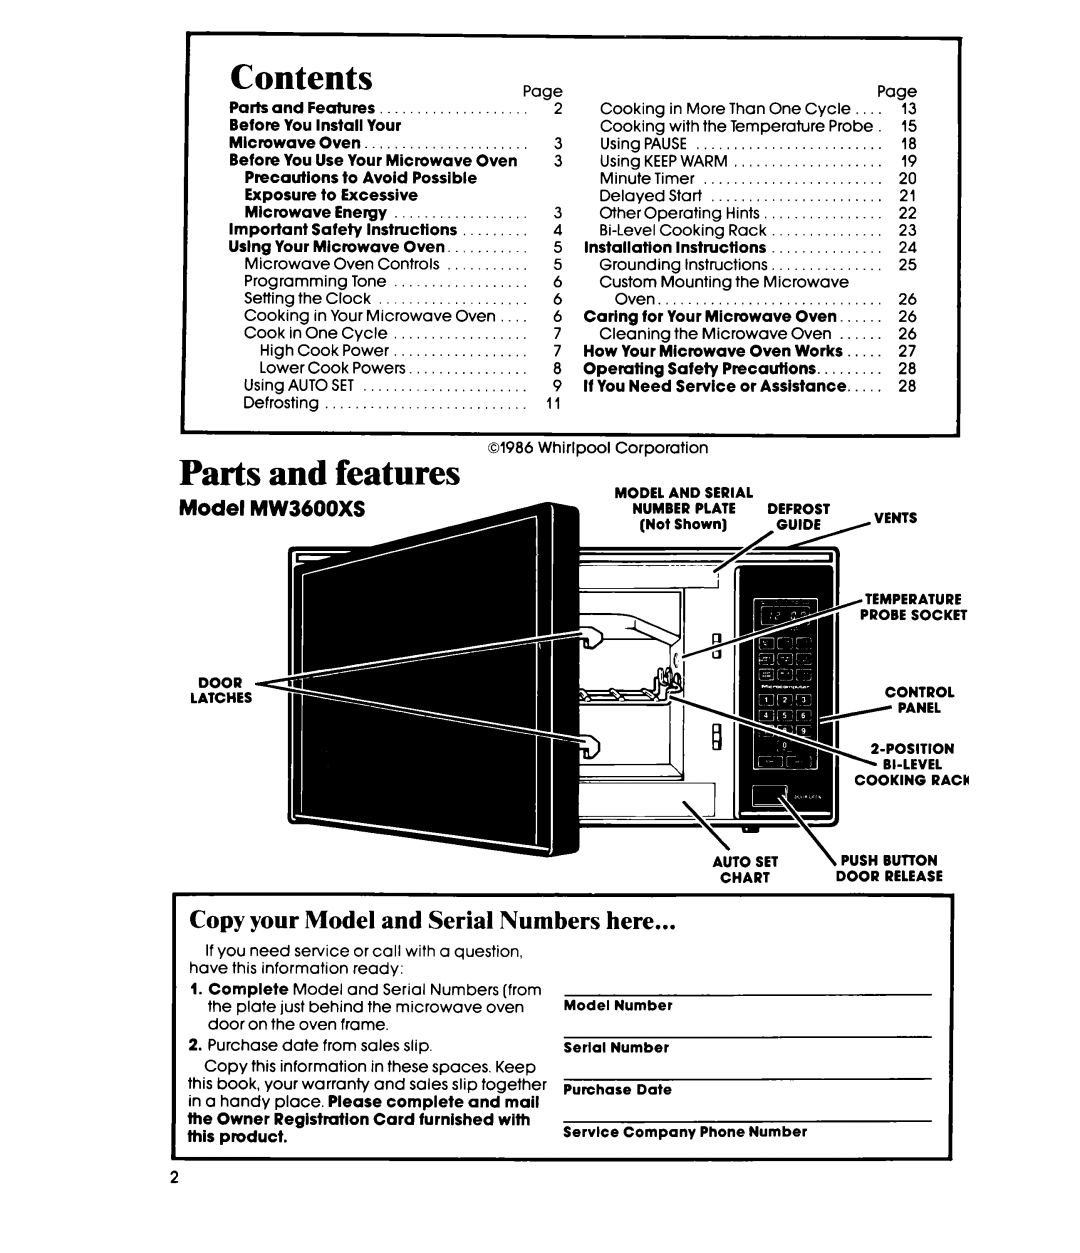 Whirlpool MW36OOXS manual Contents, Parts and features, Copy your Model and Serial Numbers here 